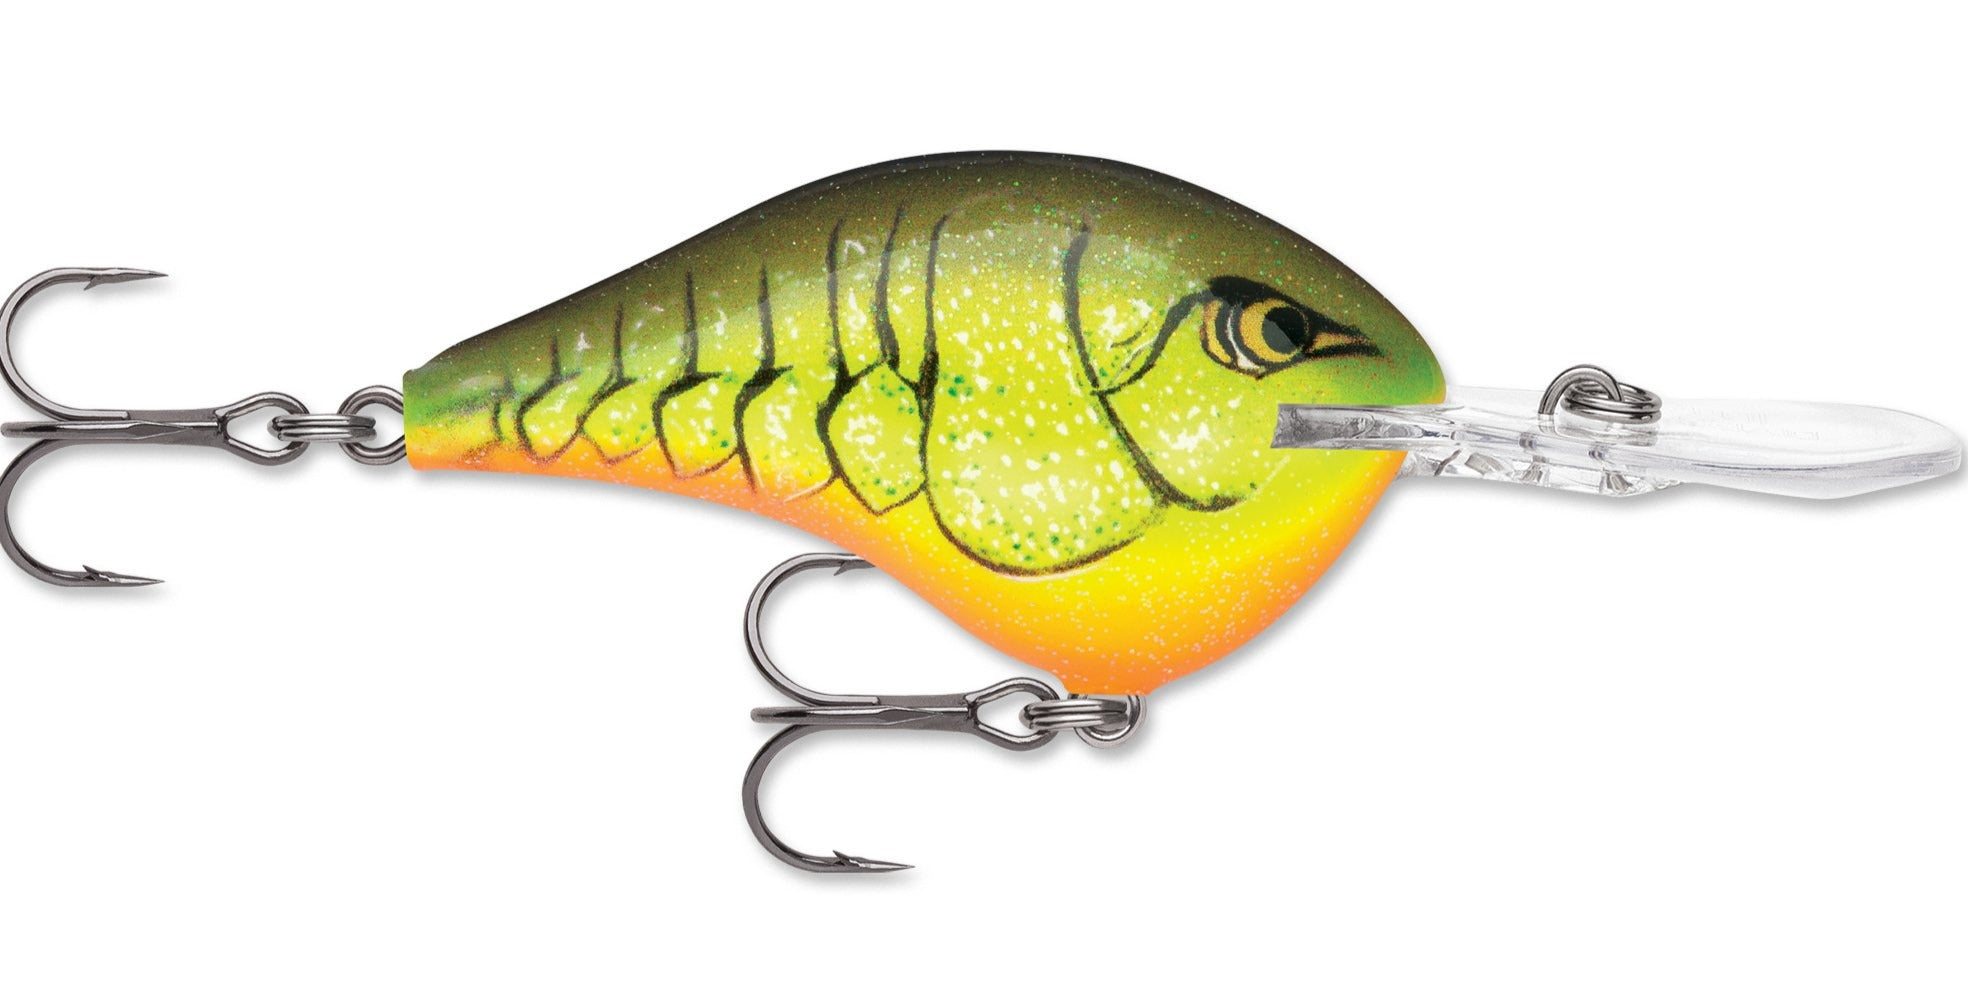 Rapala Dives-To Series 10 Olive Green Craw